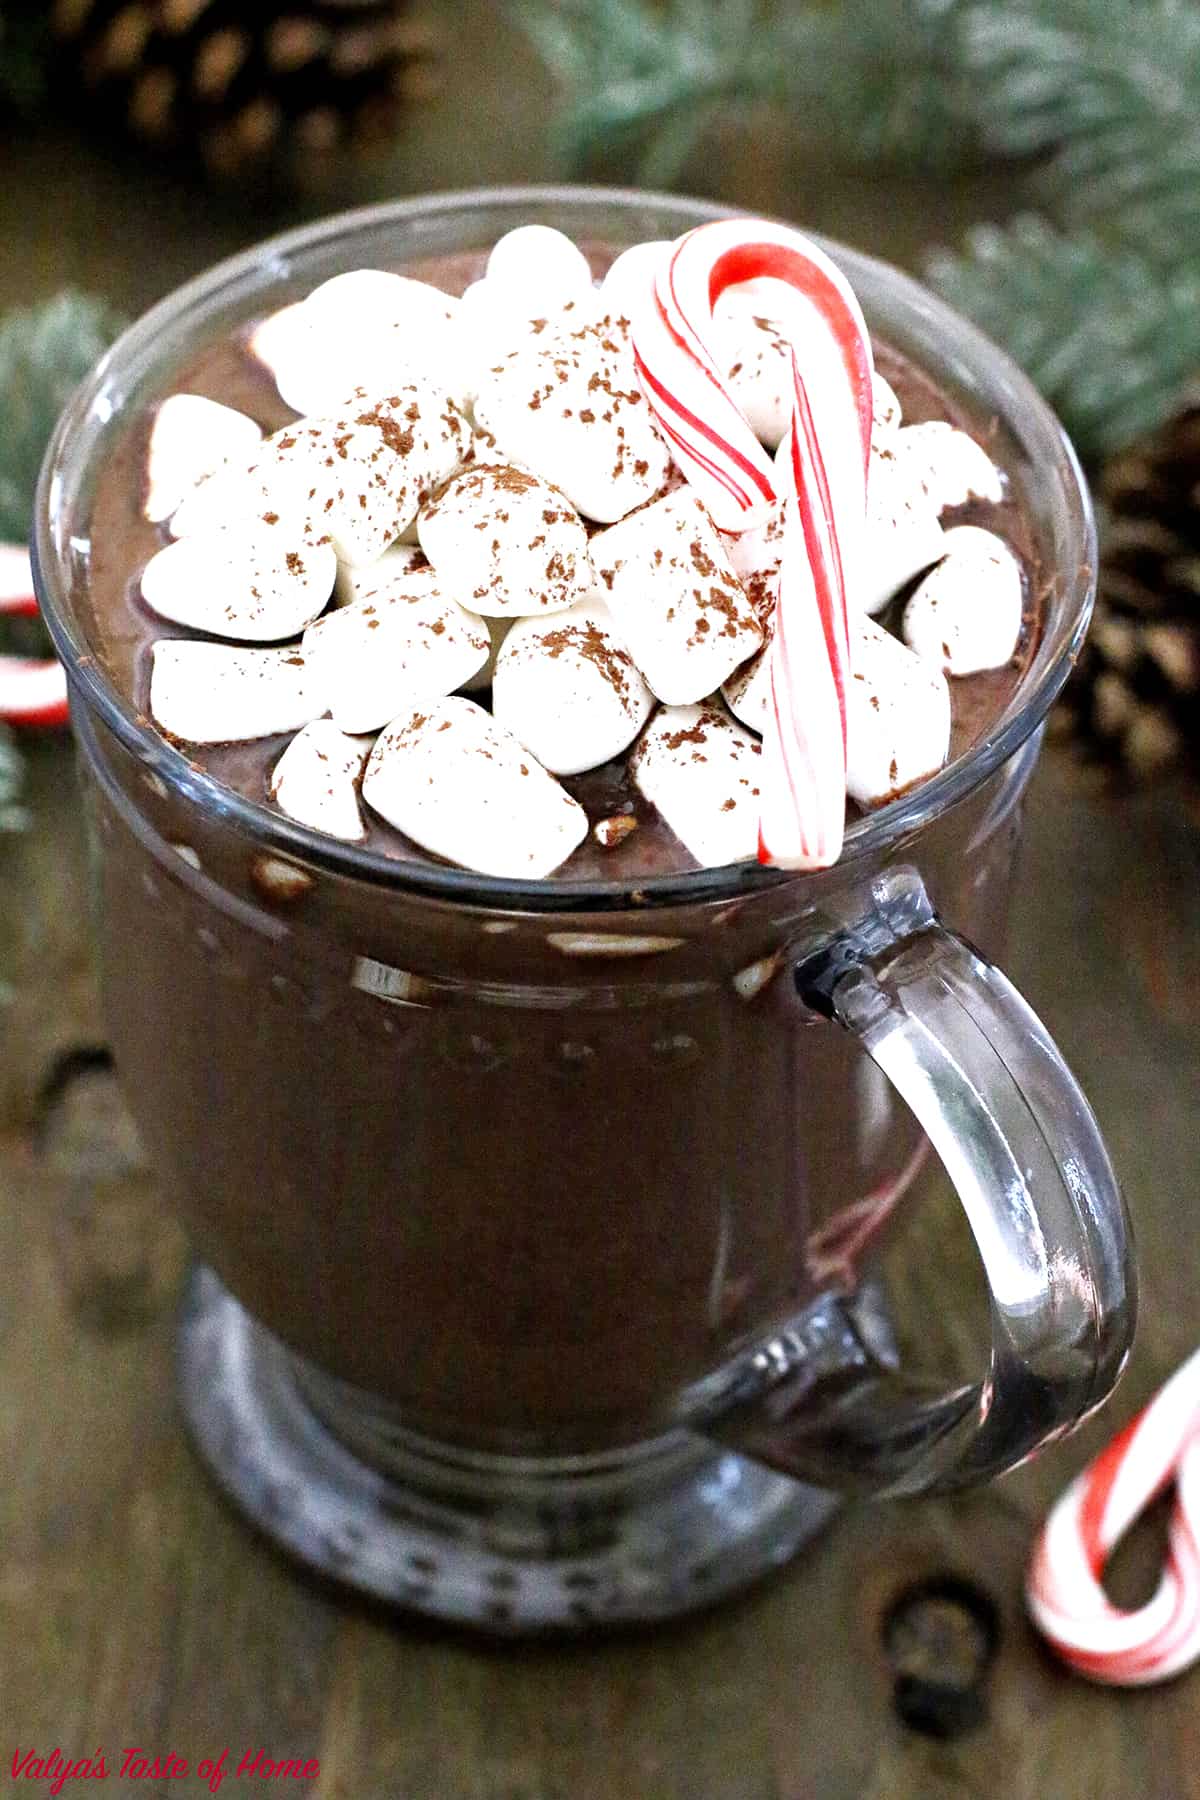 Making Rich and Creamy Homemade Hot Chocolate at home has never been easier! This rich and creamy hot cocoa made from scratch out of the ingredients you most likely to have on hand taste indescribably tasty!